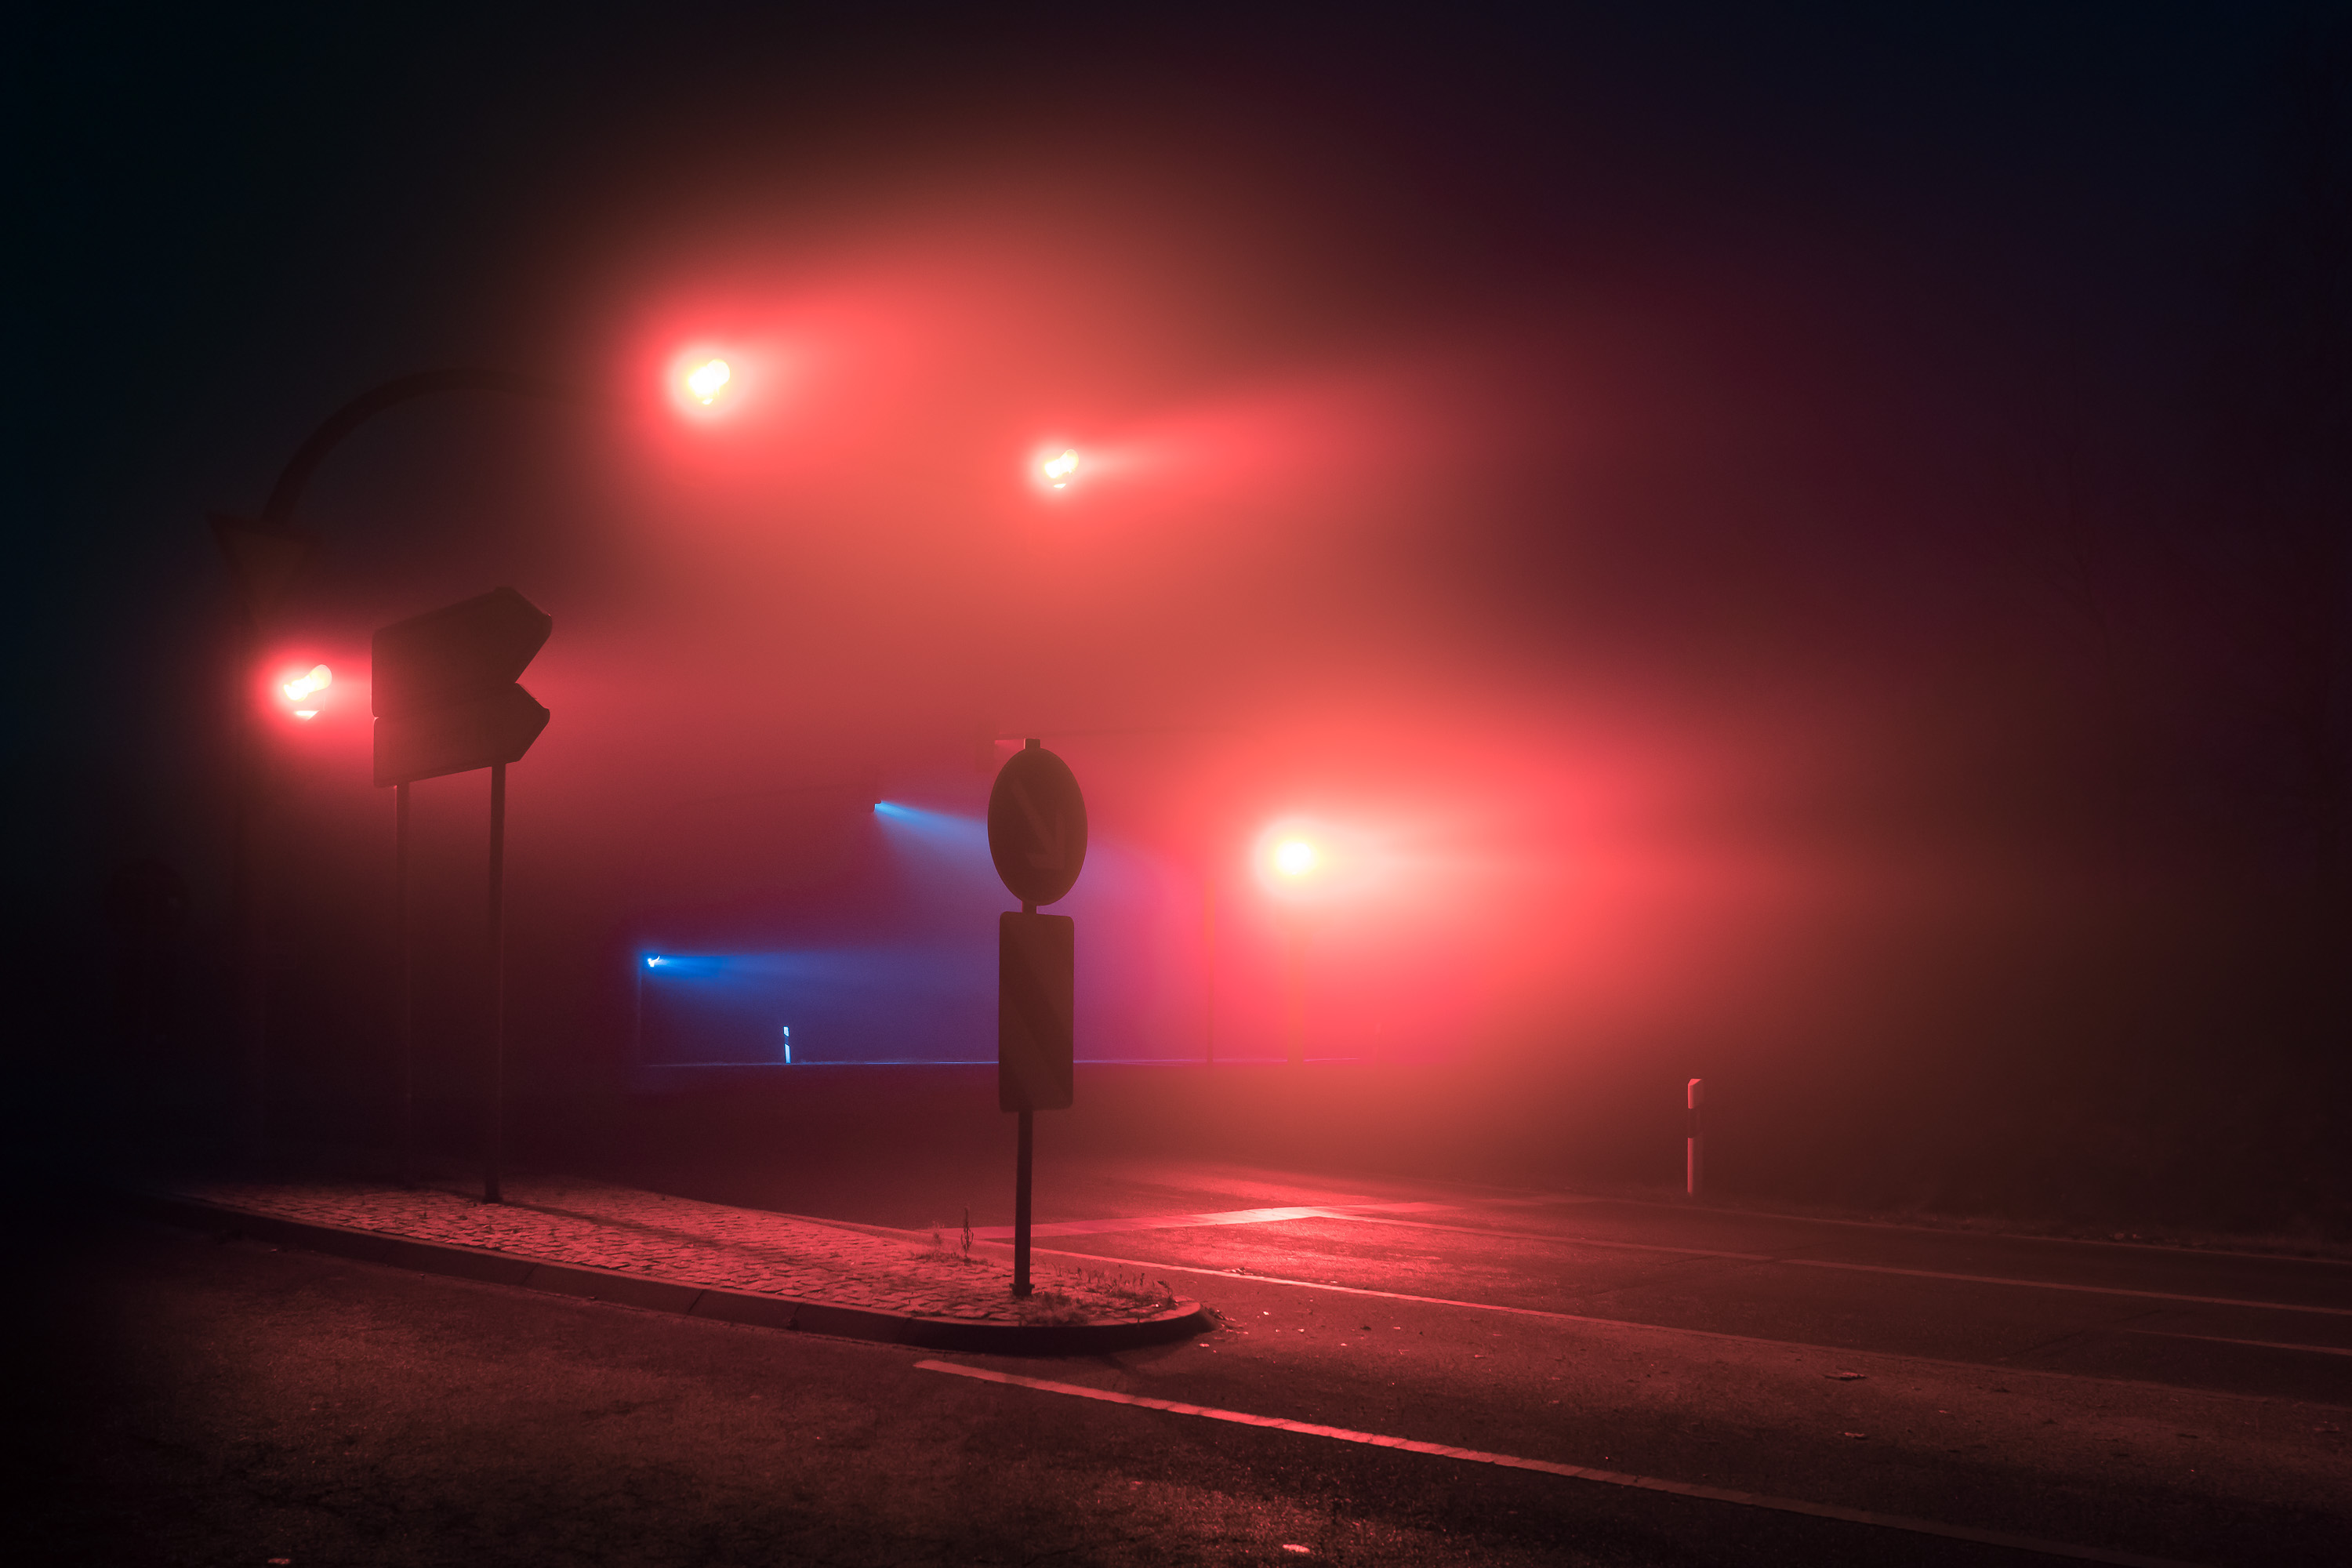 How Andreas Levers Does His Beautiful “At Night” Series of Photos